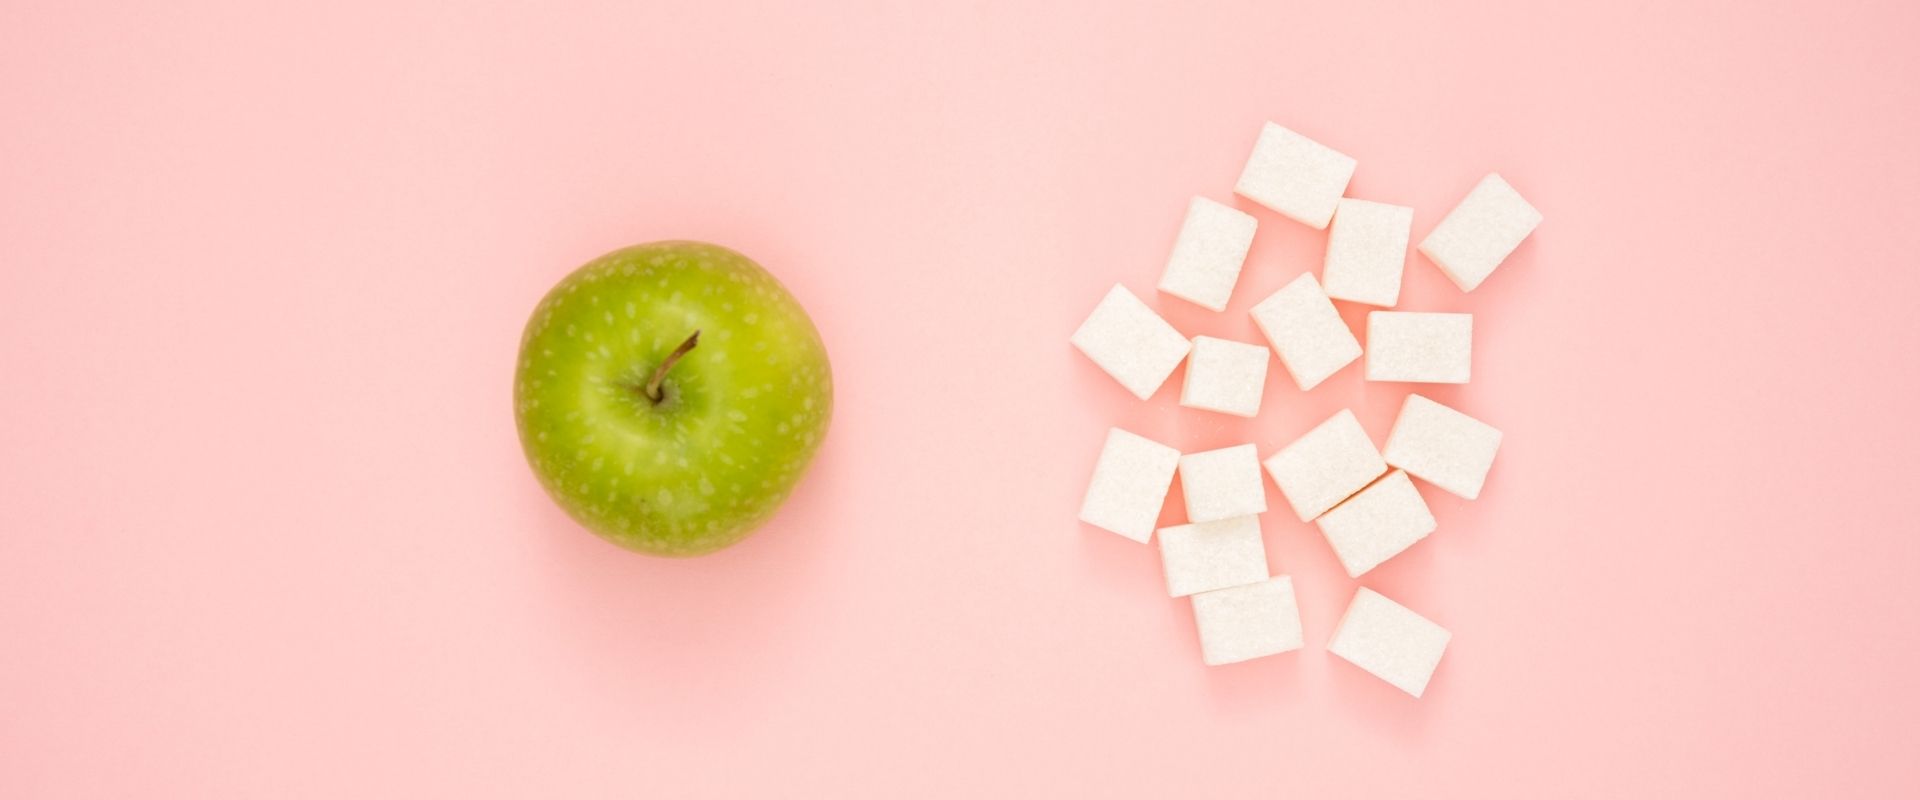 Fruit Sugar vs. Refined Sugar: What’s the Difference?